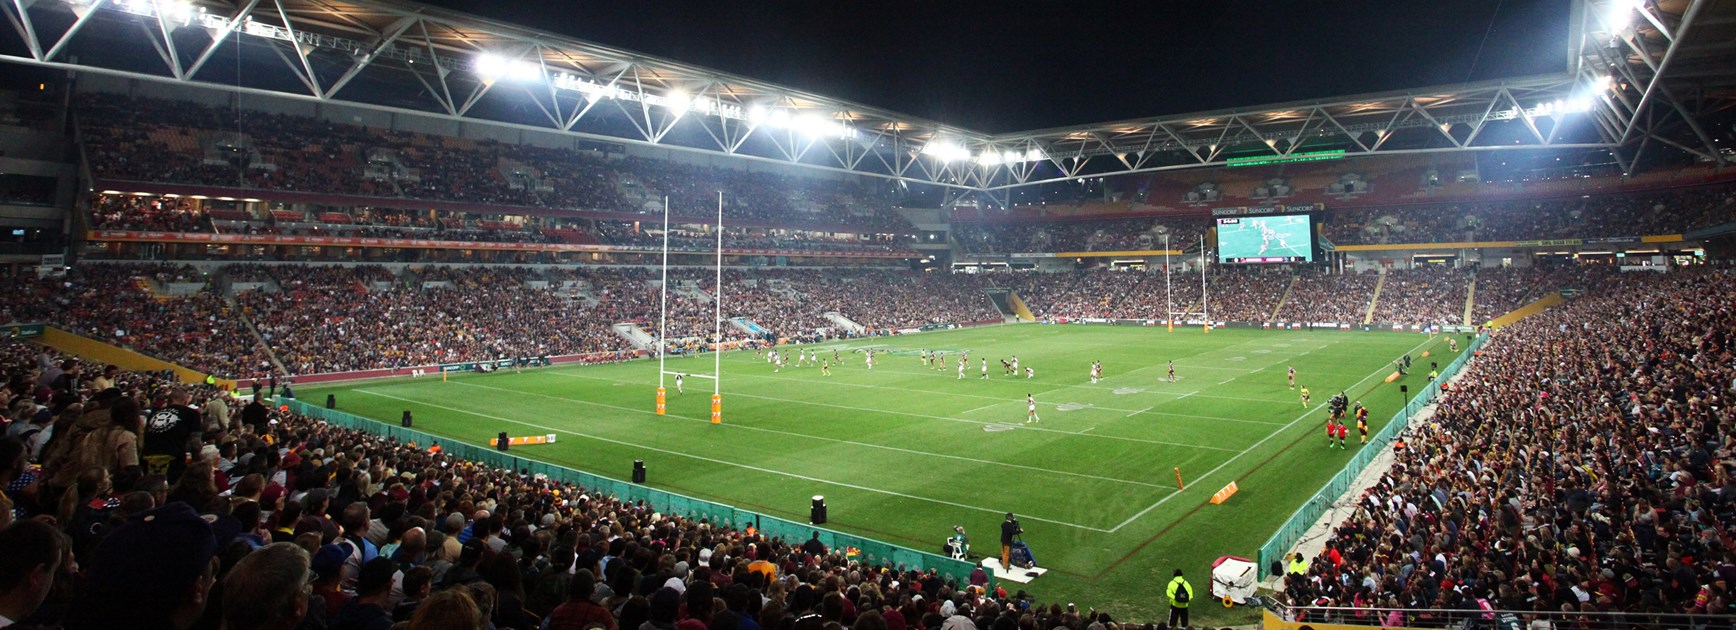 COVID-19 safety update for fans attending Origin II